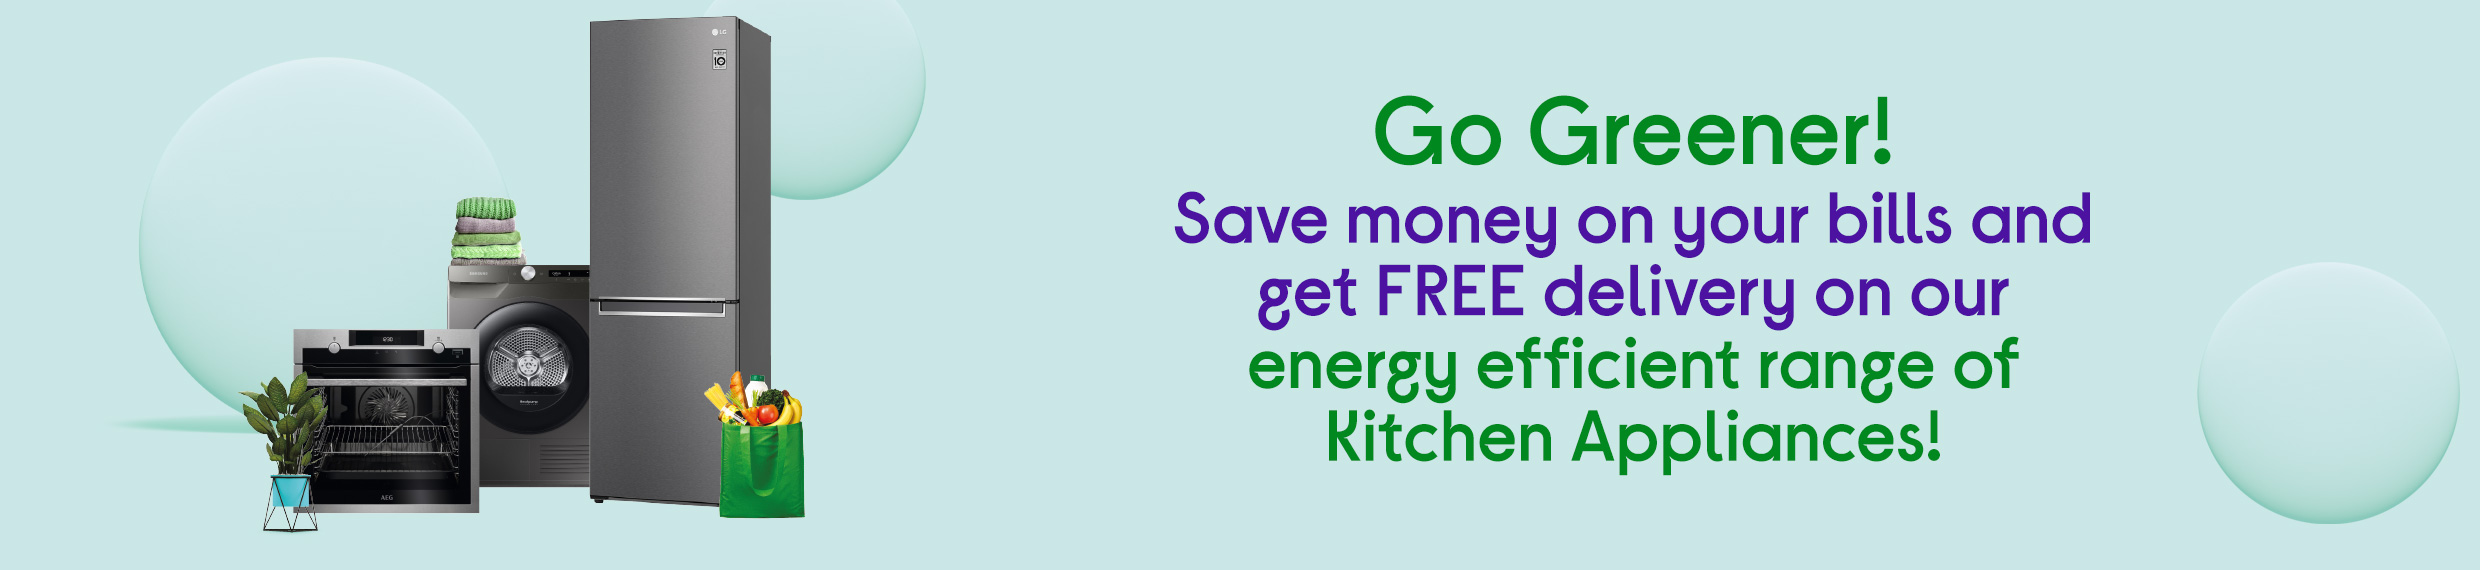 Free delivery on energy efficient appliances